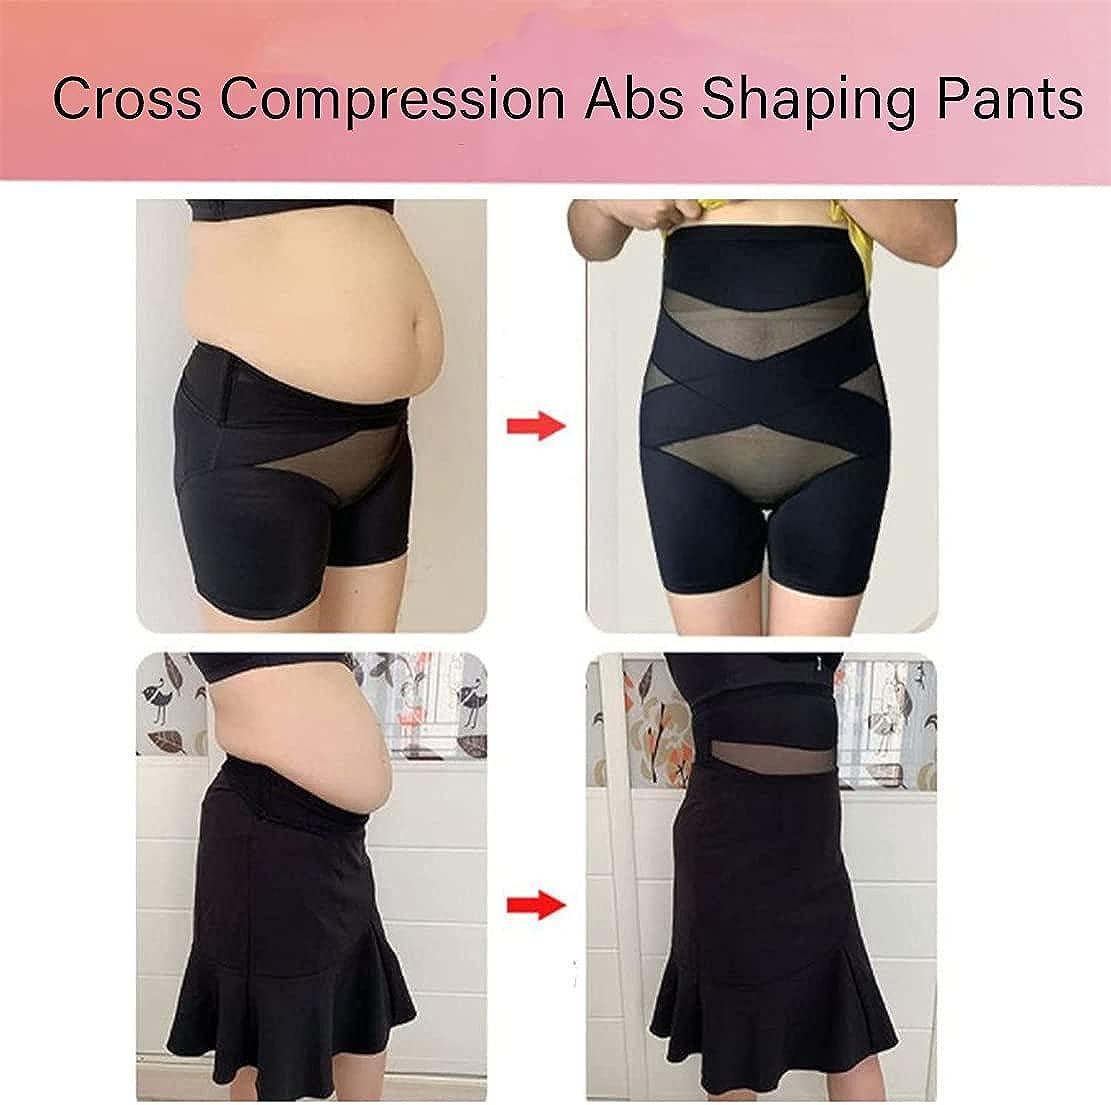 Shaping Pants Skin-friendly Cross Compression Abs Shaping Pants